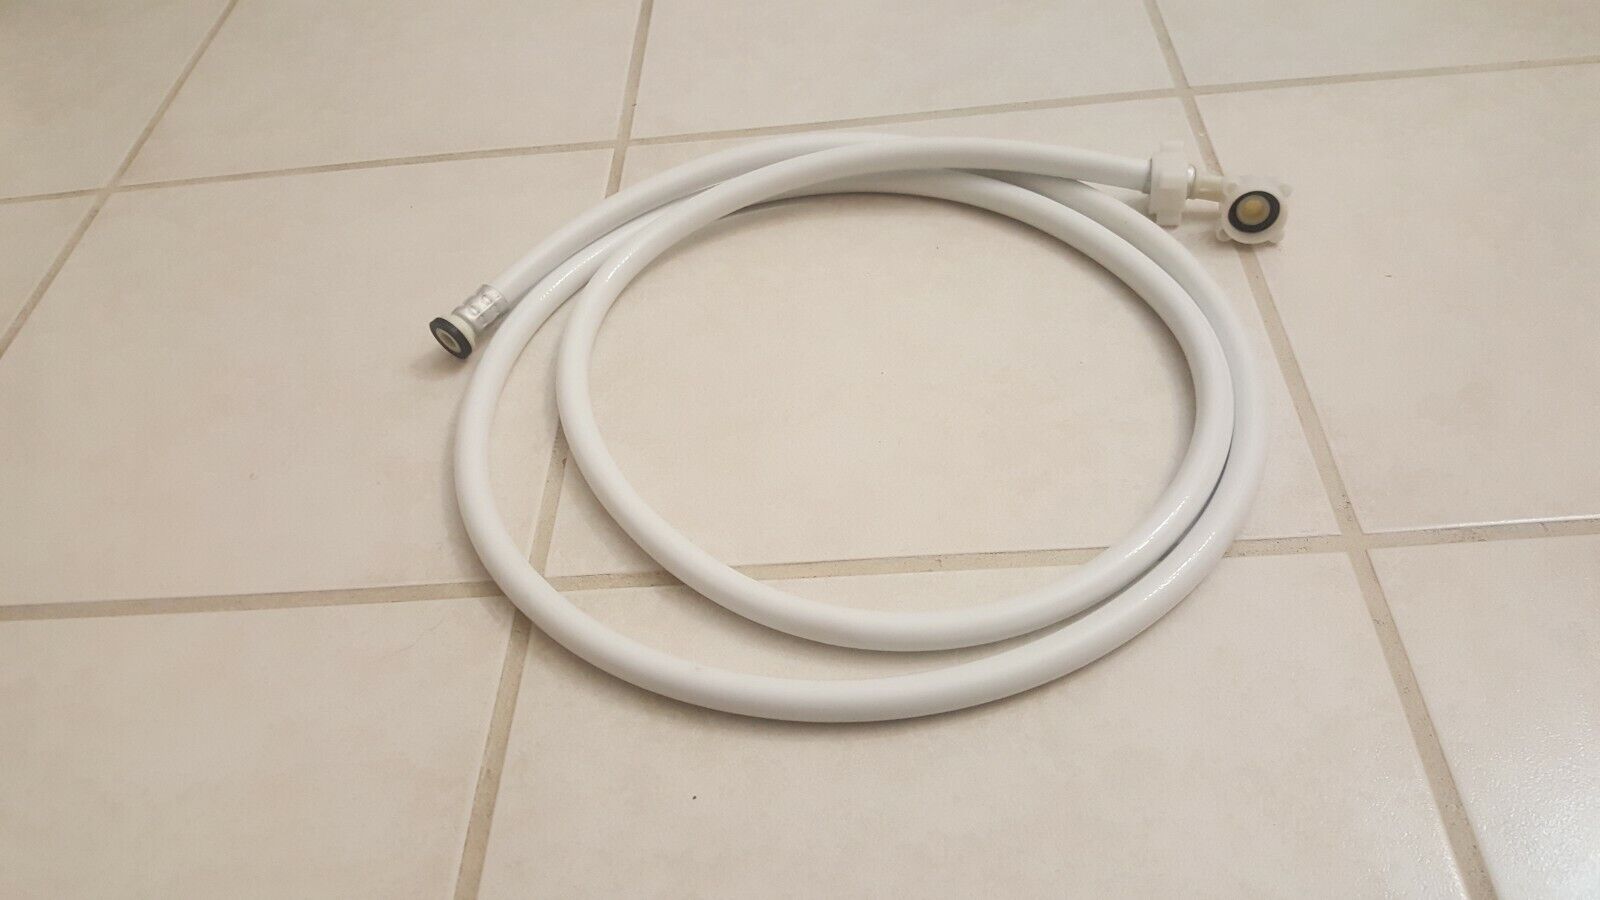 OEM Replacement Water Hose  For CatGenie 120 Self-Cleaning Litter Box